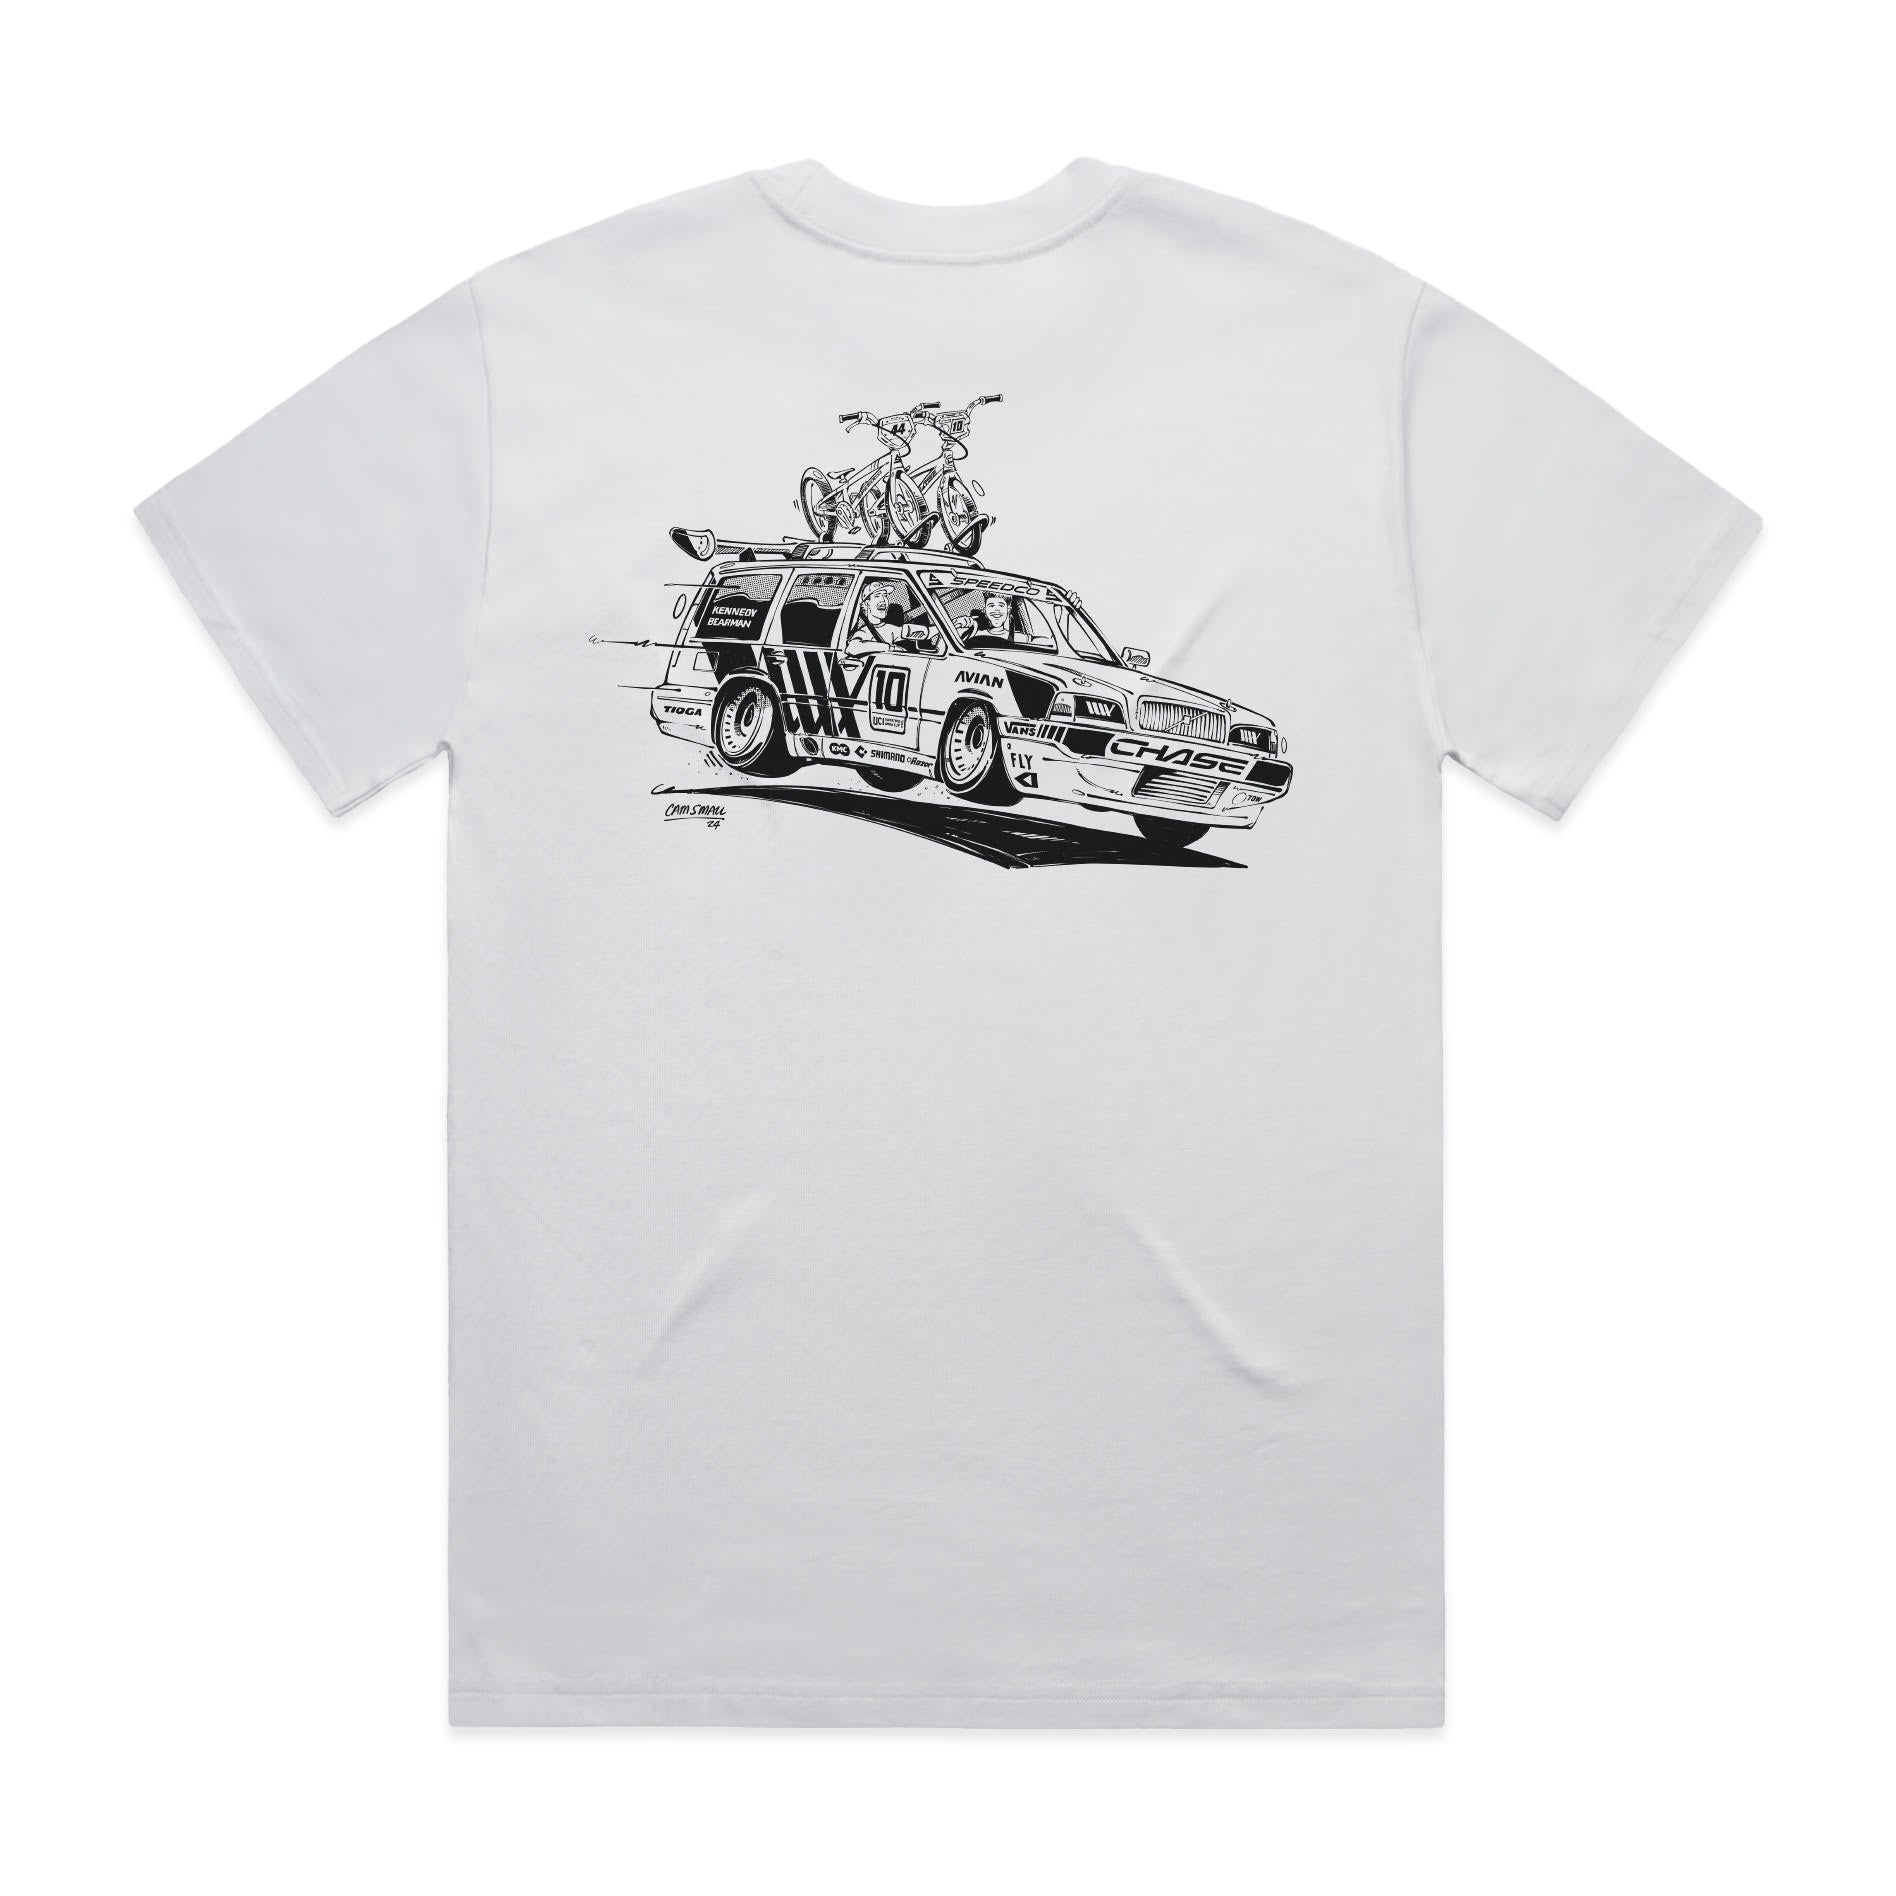 A LUXBMX Izaac X Rico Tee with a hand drawn print of a car on it.